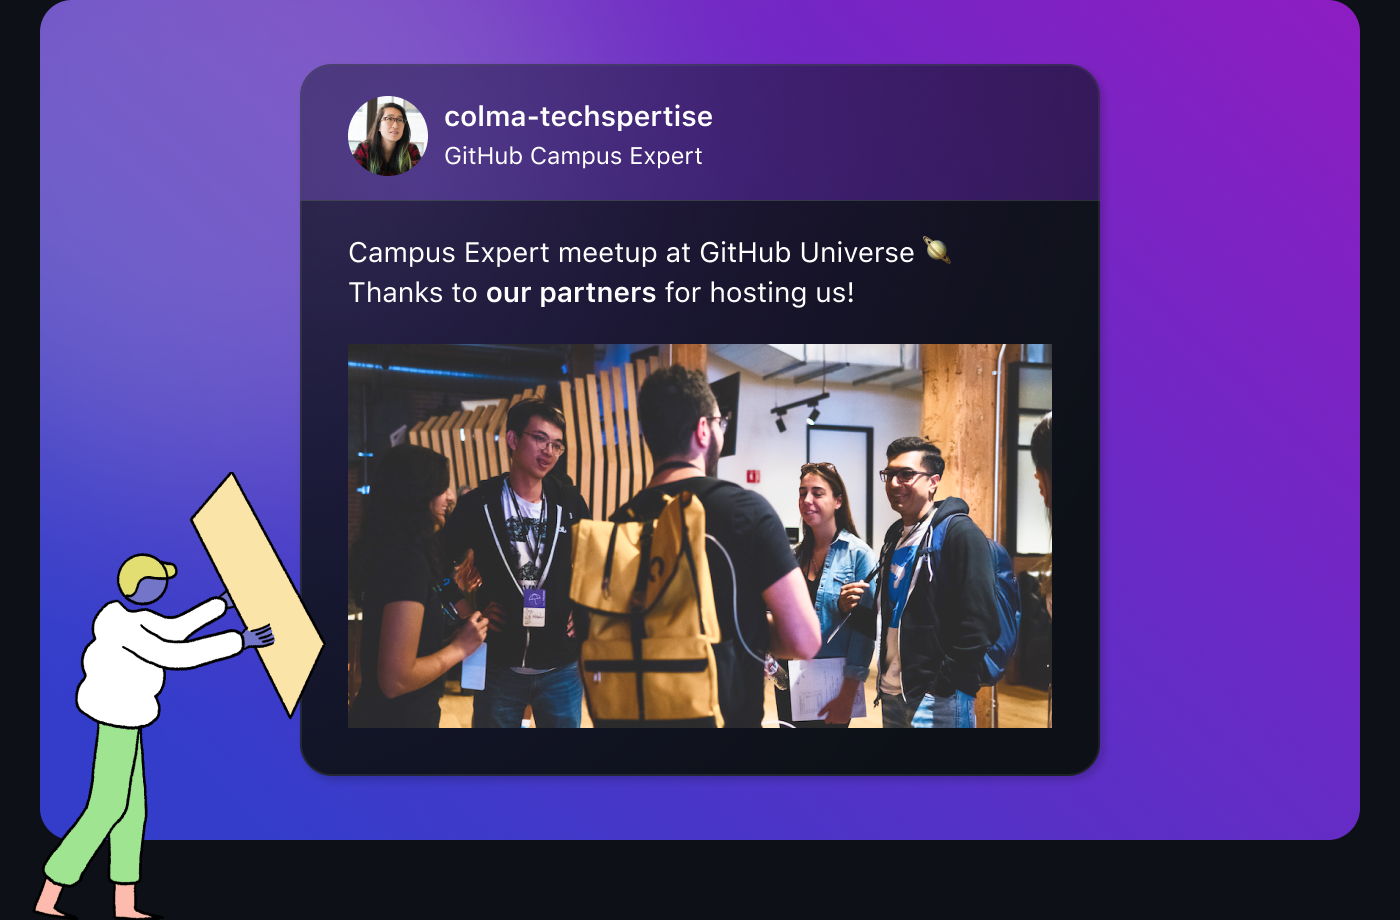 A social media post with image of 4 people talking and text Campus Expert meetup at GitHub Universe. Thanks to our partners for hosting us!